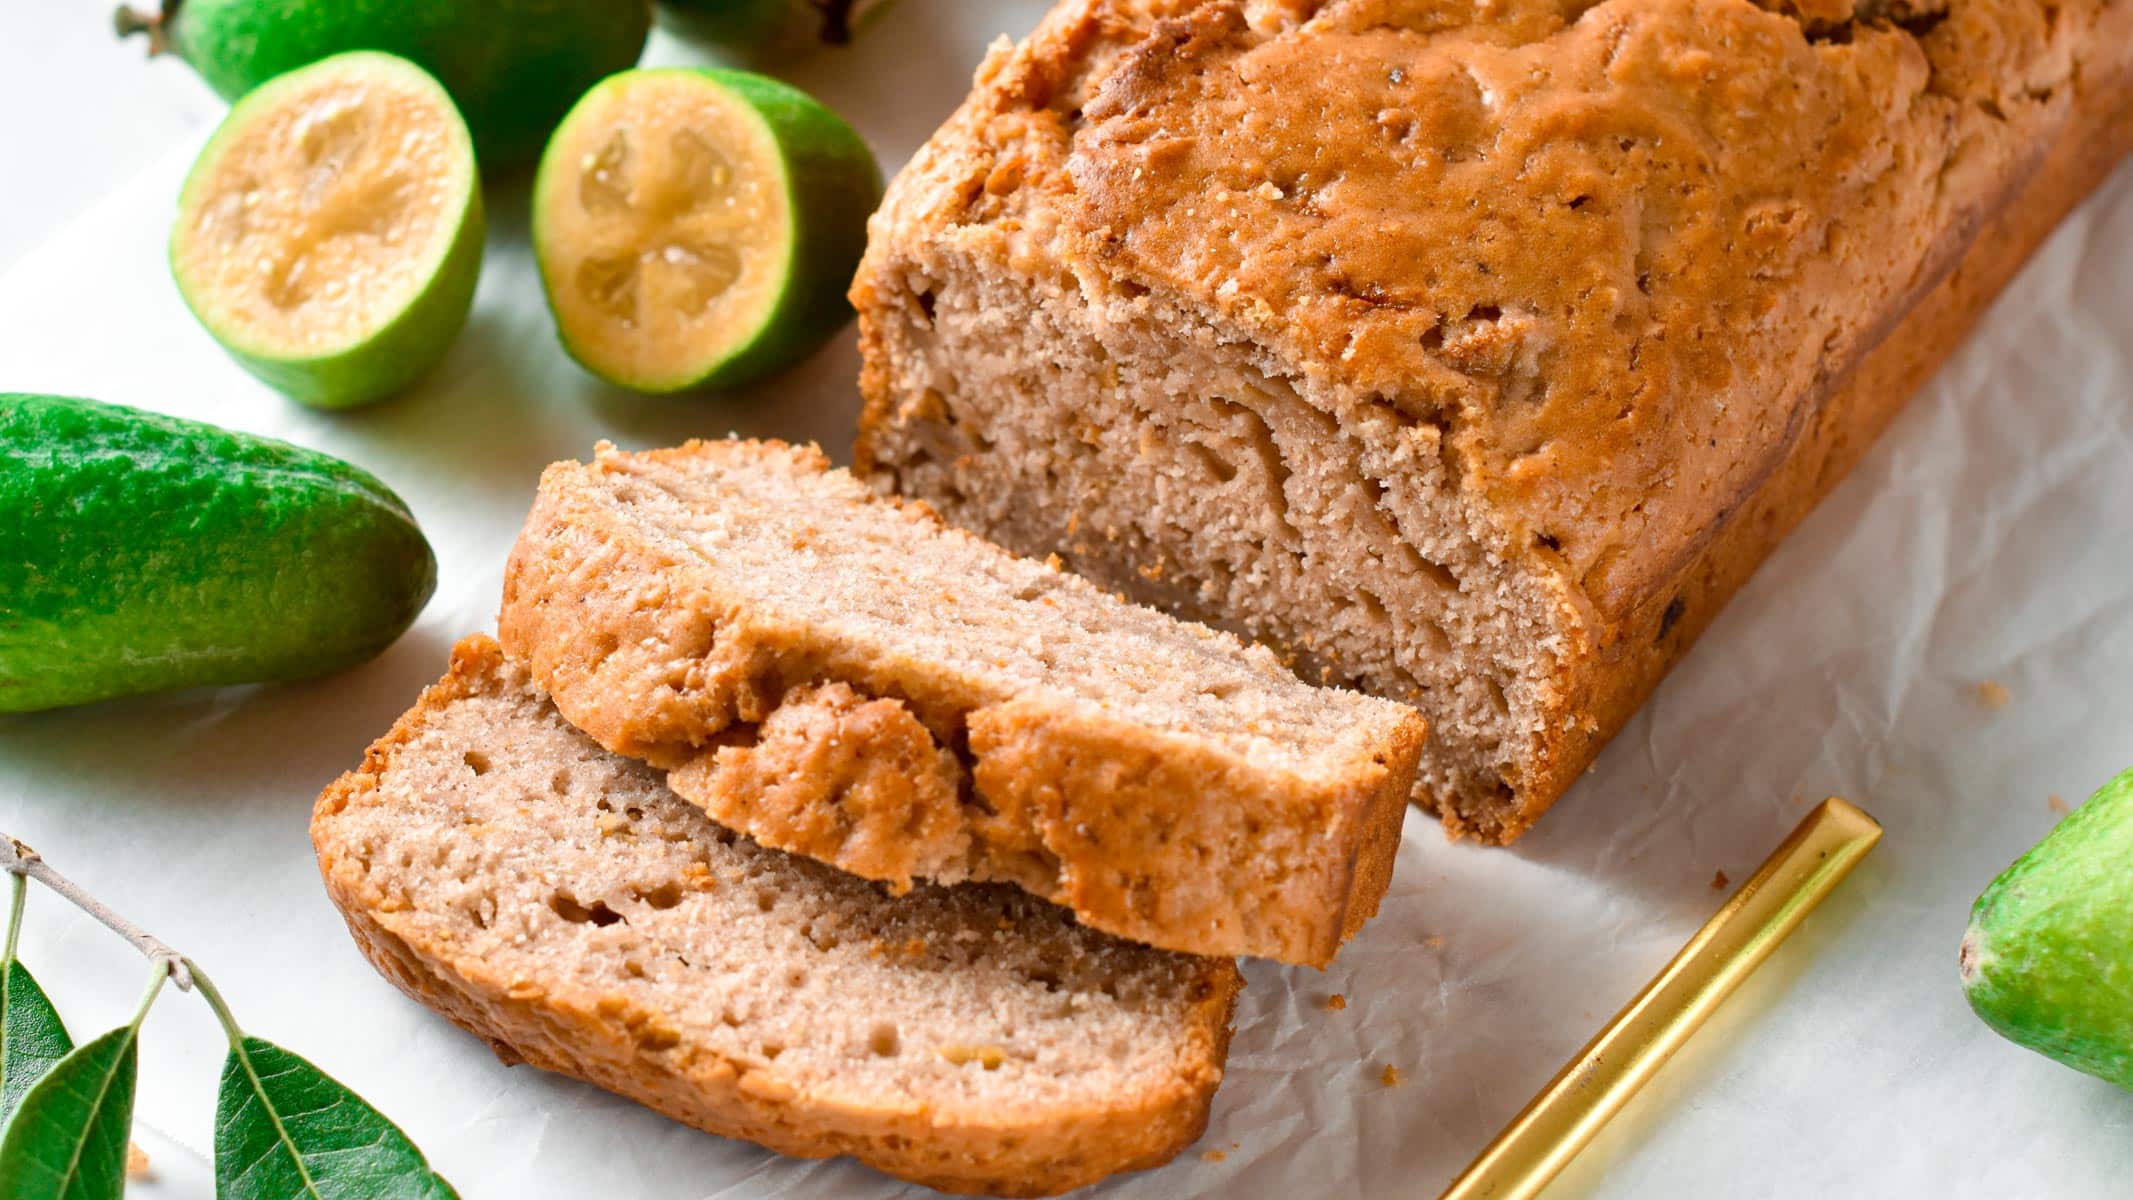 This Feijoa Loaf is a moist, sweet loaf flavored with Feijoa fruits and perfect to use all your Feijoa this Autumn